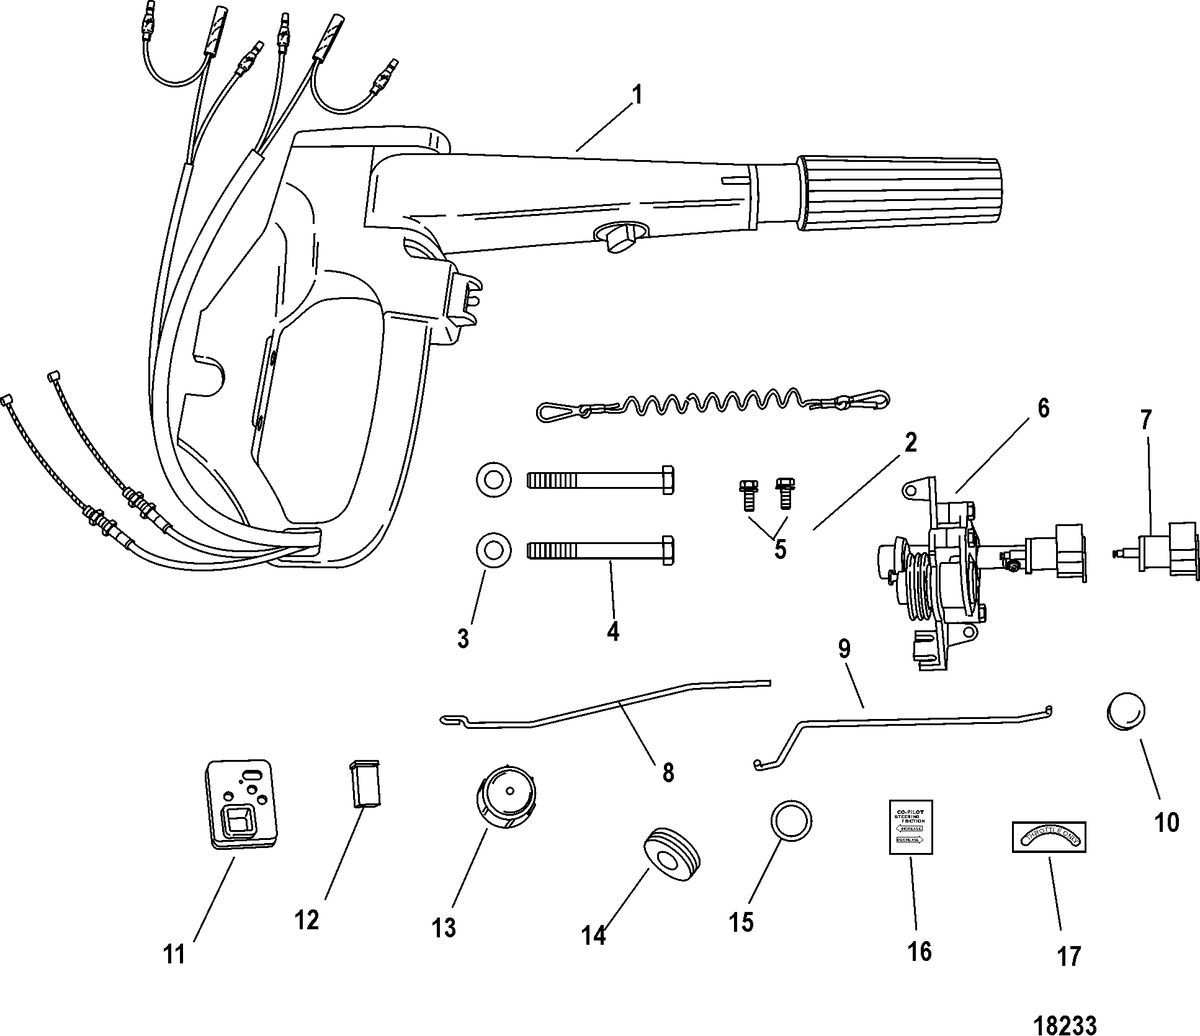 ACCESSORIES STEERING SYSTEMS AND COMPONENTS Tiller Handle Conversion Kit-Manual, 896289A01